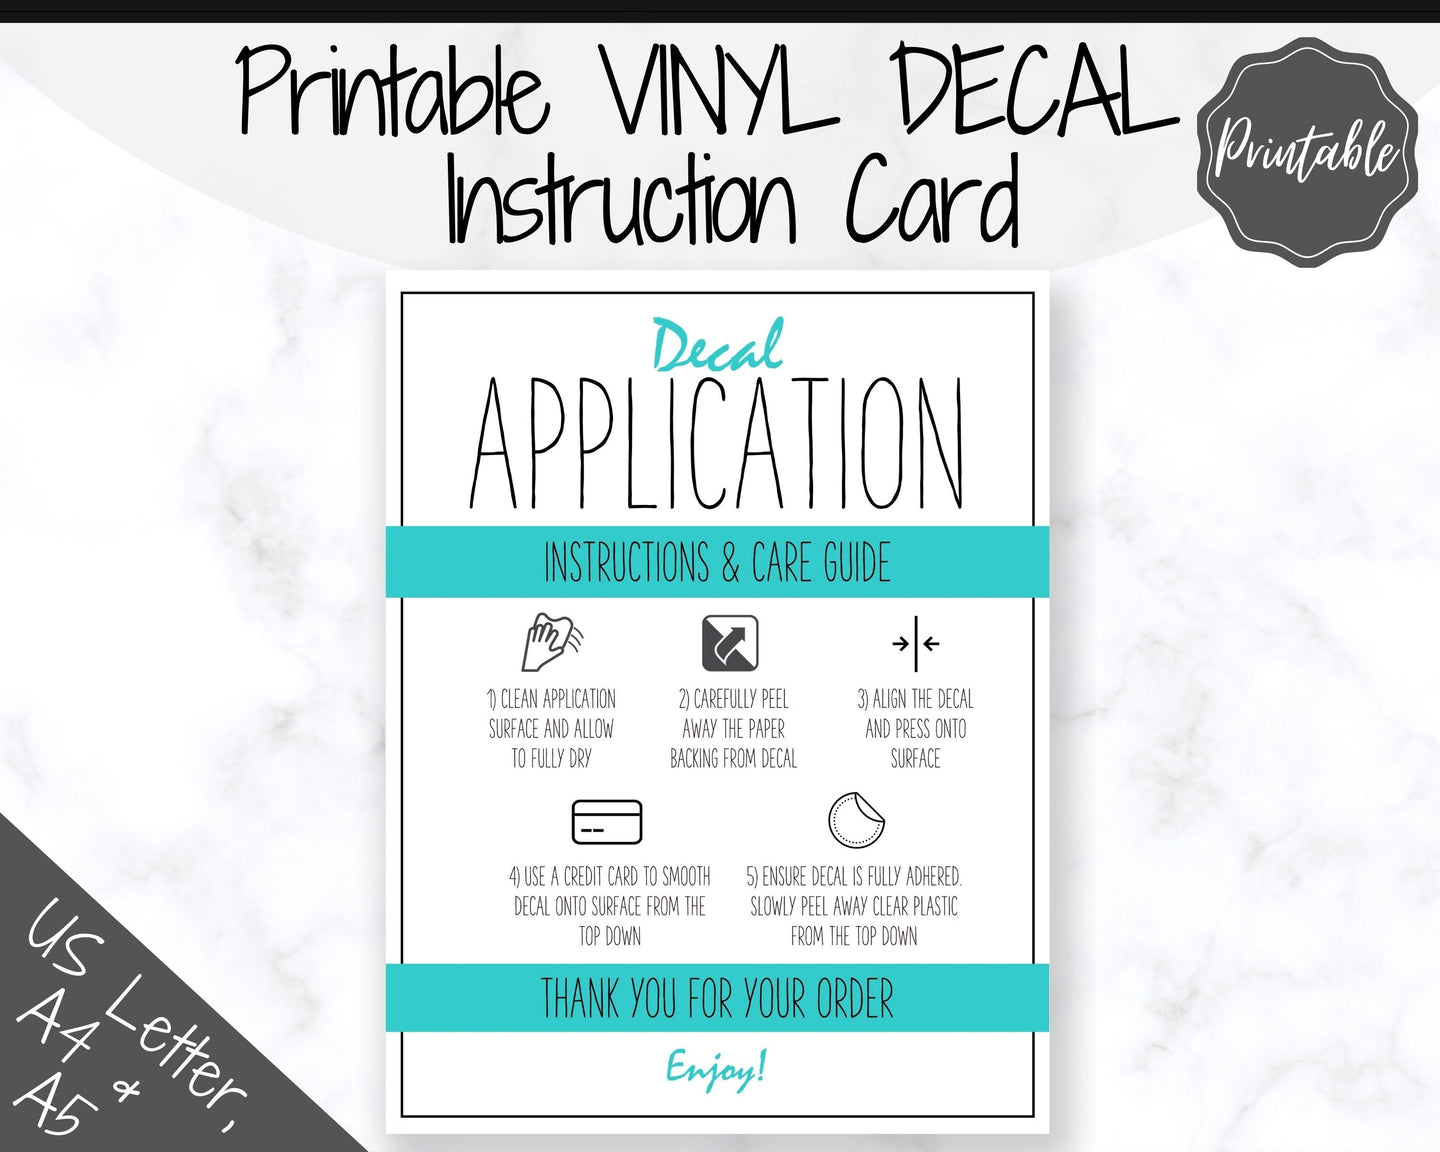 Printable Vinyl Decal Care Card Instructions. Decal Application Order Card, DIY Sticker Seller Packaging Label, Vinyl Decal Care Cards | Teal